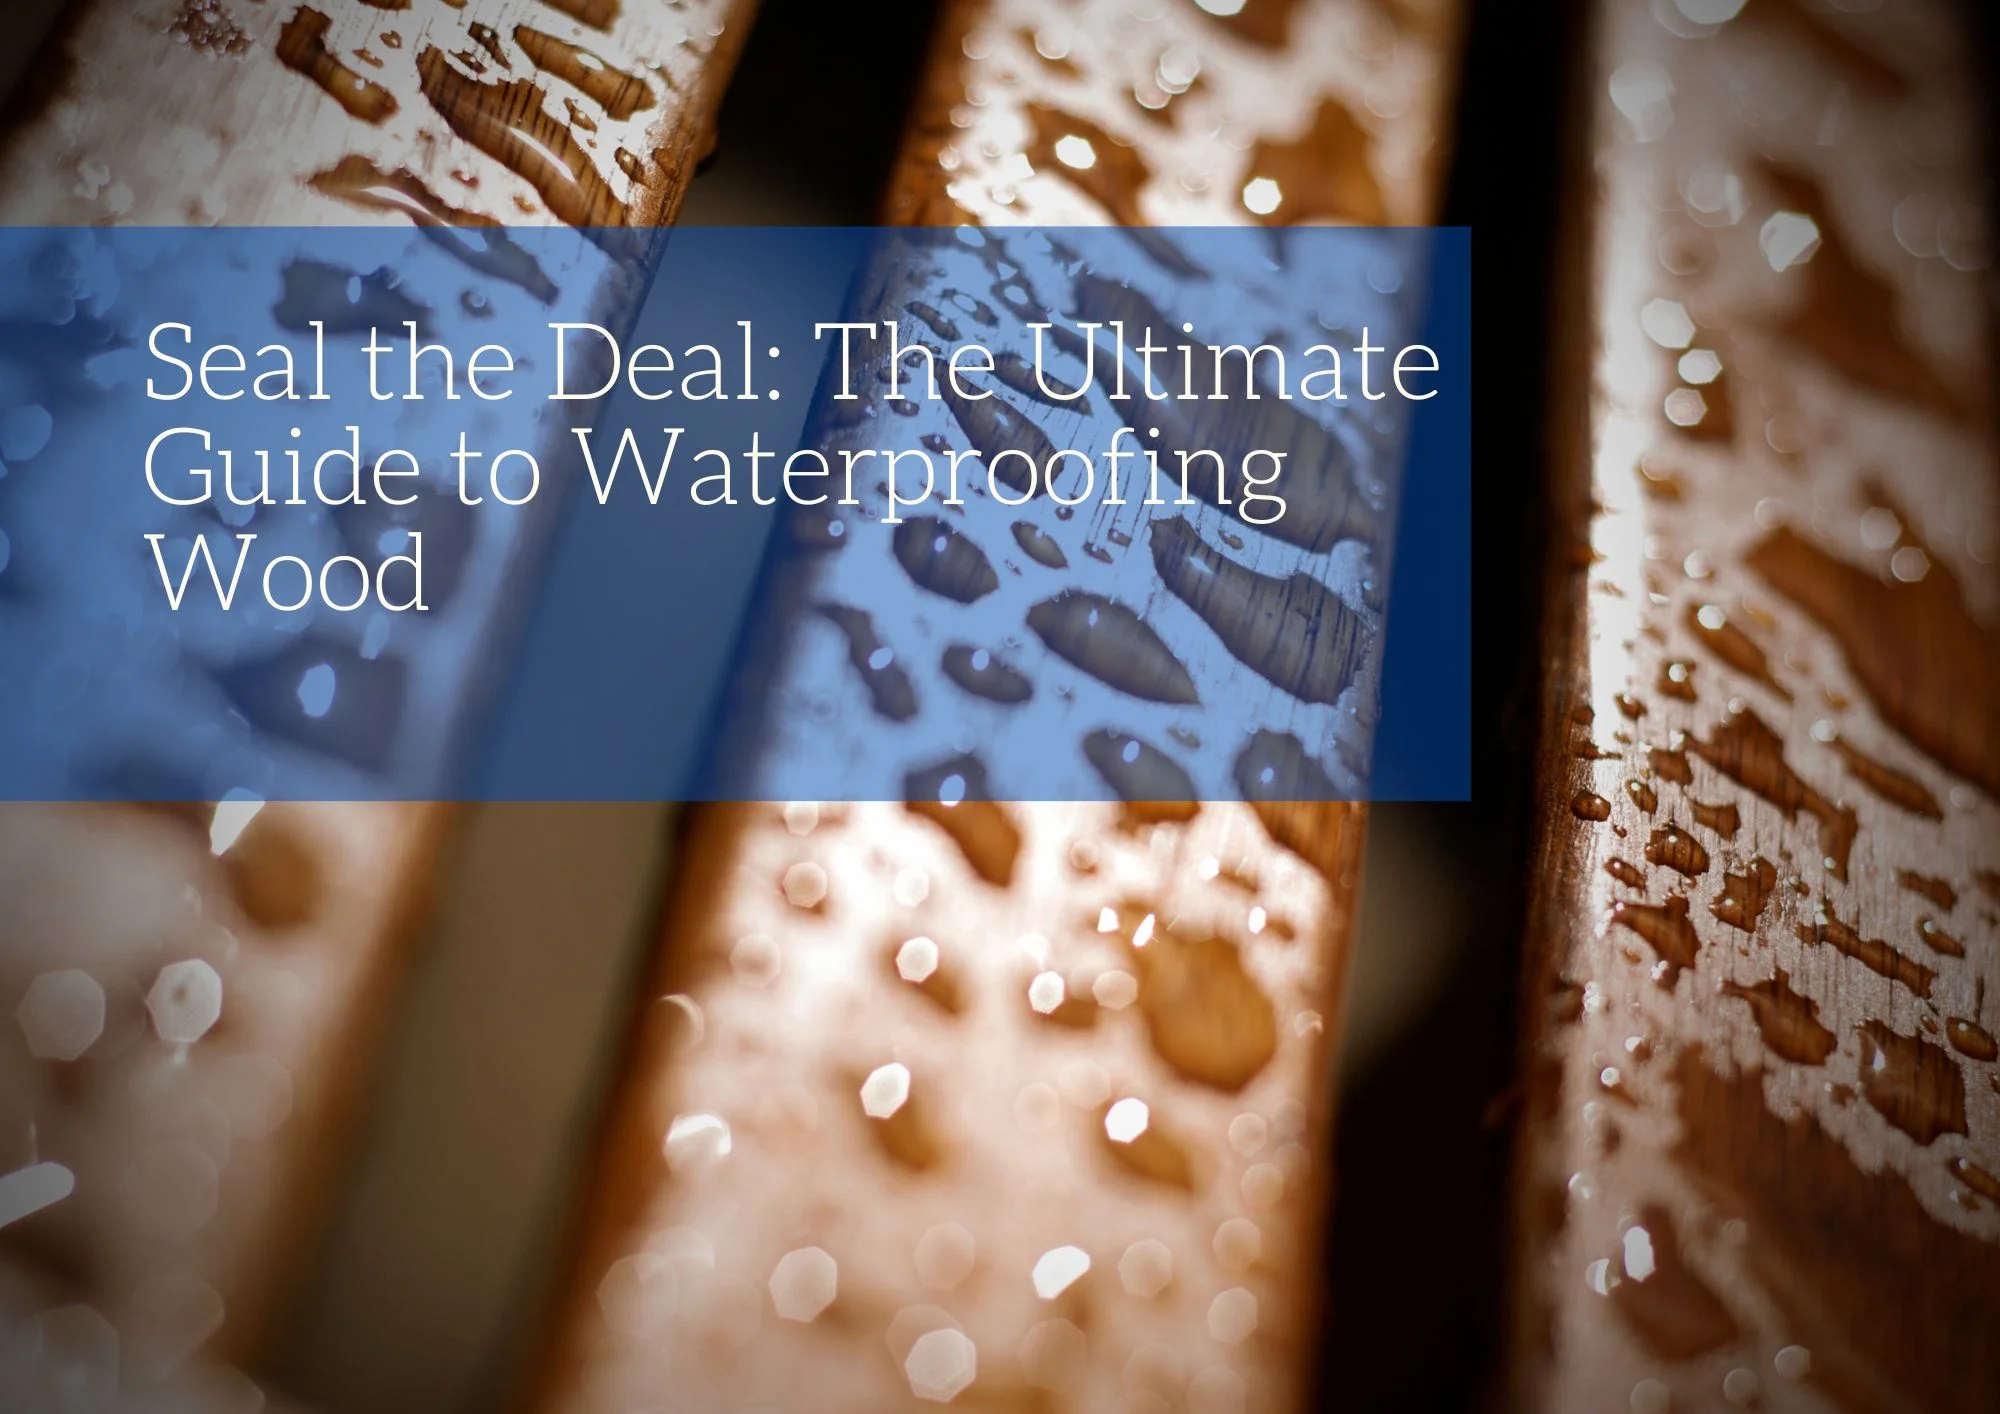 Seal the Deal: The Ultimate Guide to Waterproofing Wood